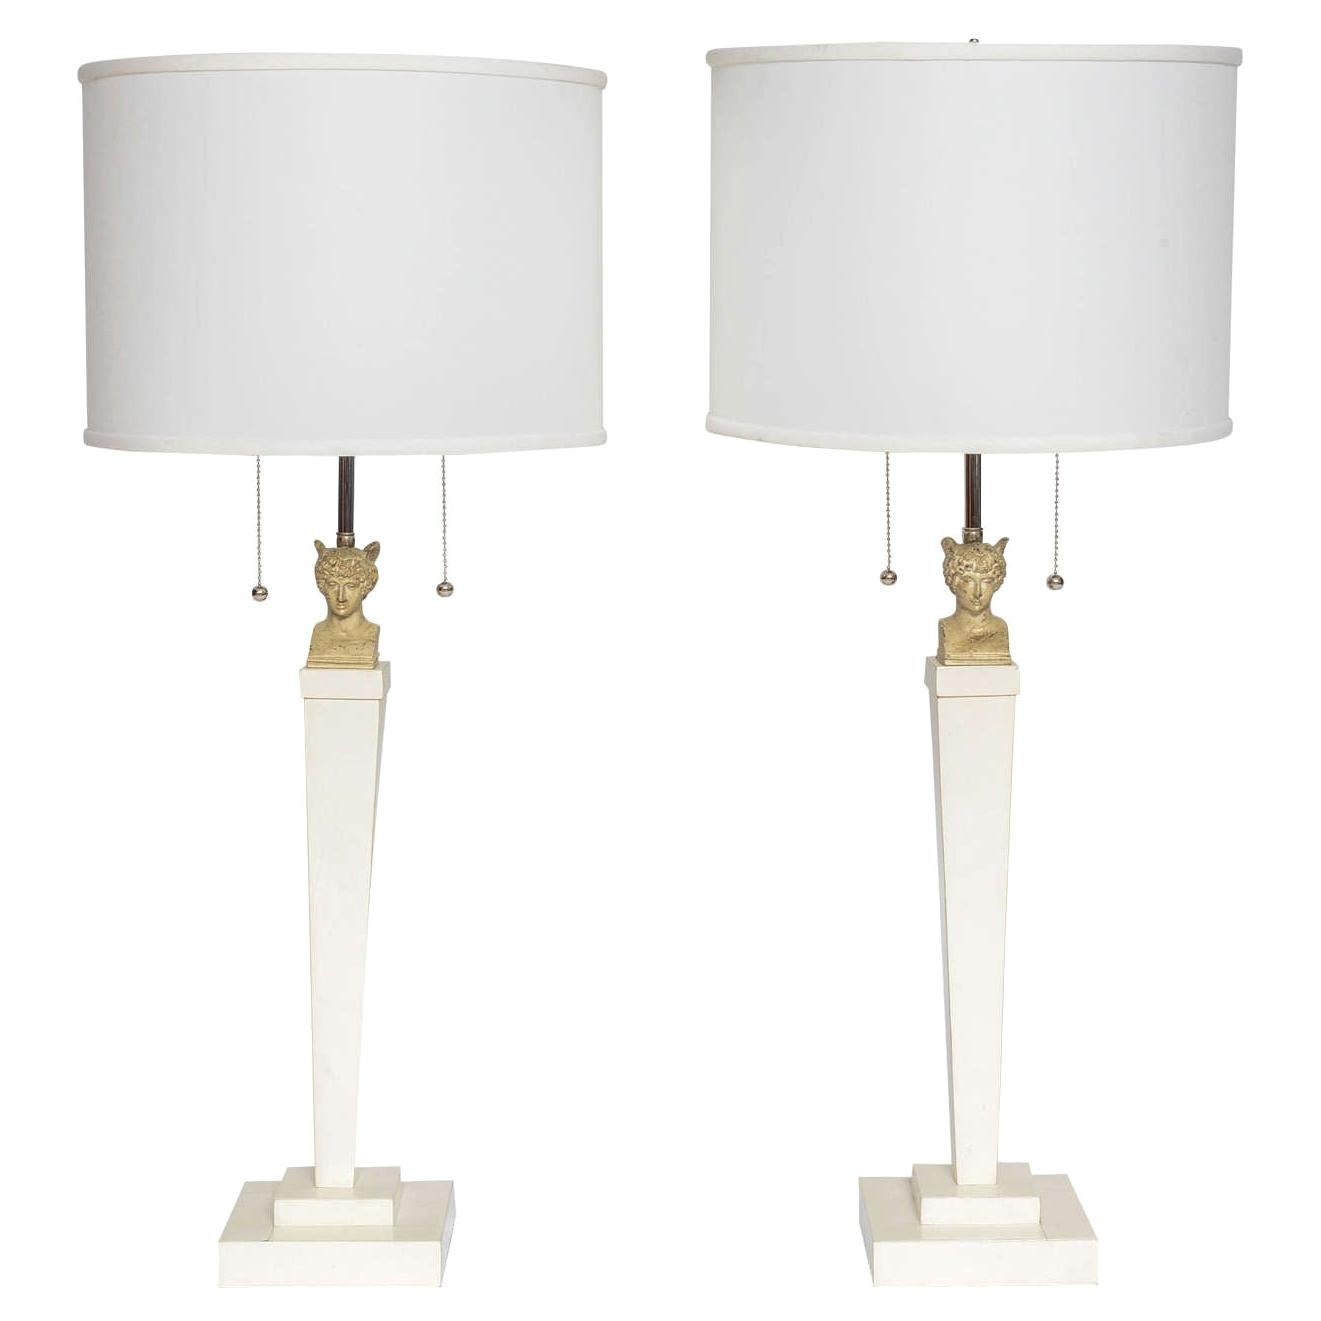 Vintage Italian Neoclassic Style Parchment Column Table Lamps, Pair For Sale